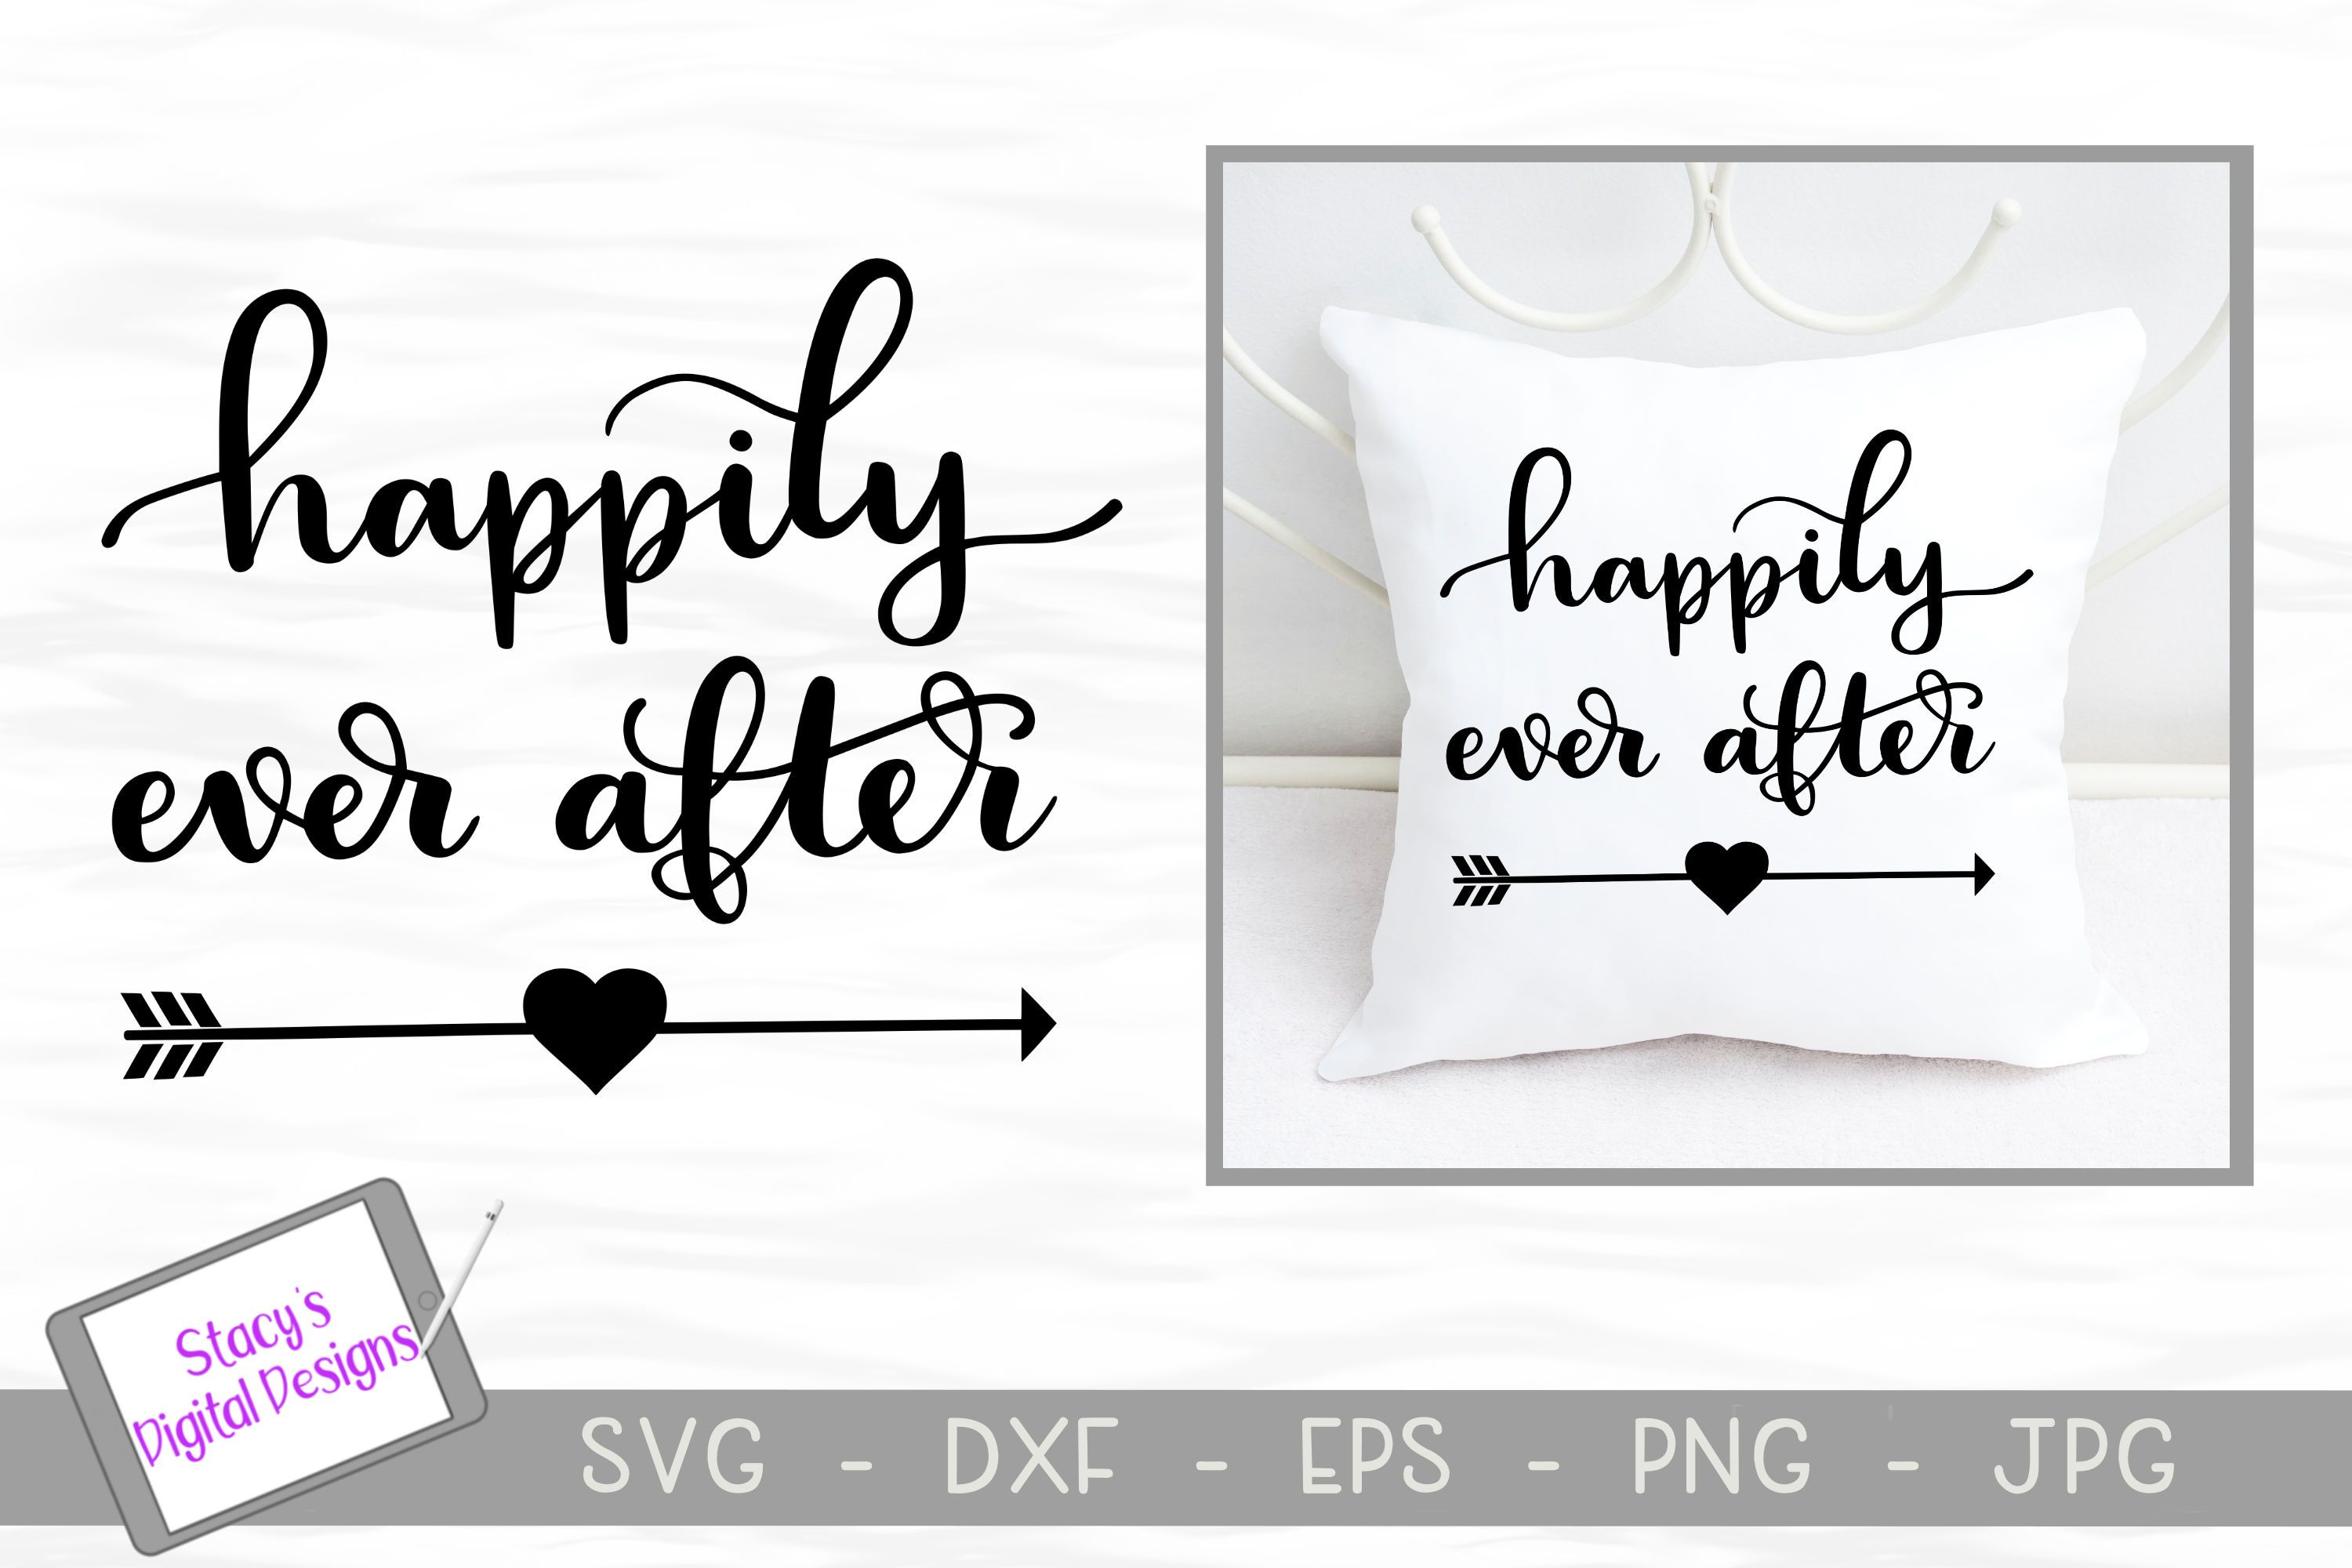 Download Wedding Cut File Wedding Sign Svg Files Wedding Quotes Svg Cut Files Happily Ever After Svg Clip Art Art Collectibles Delage Com Br